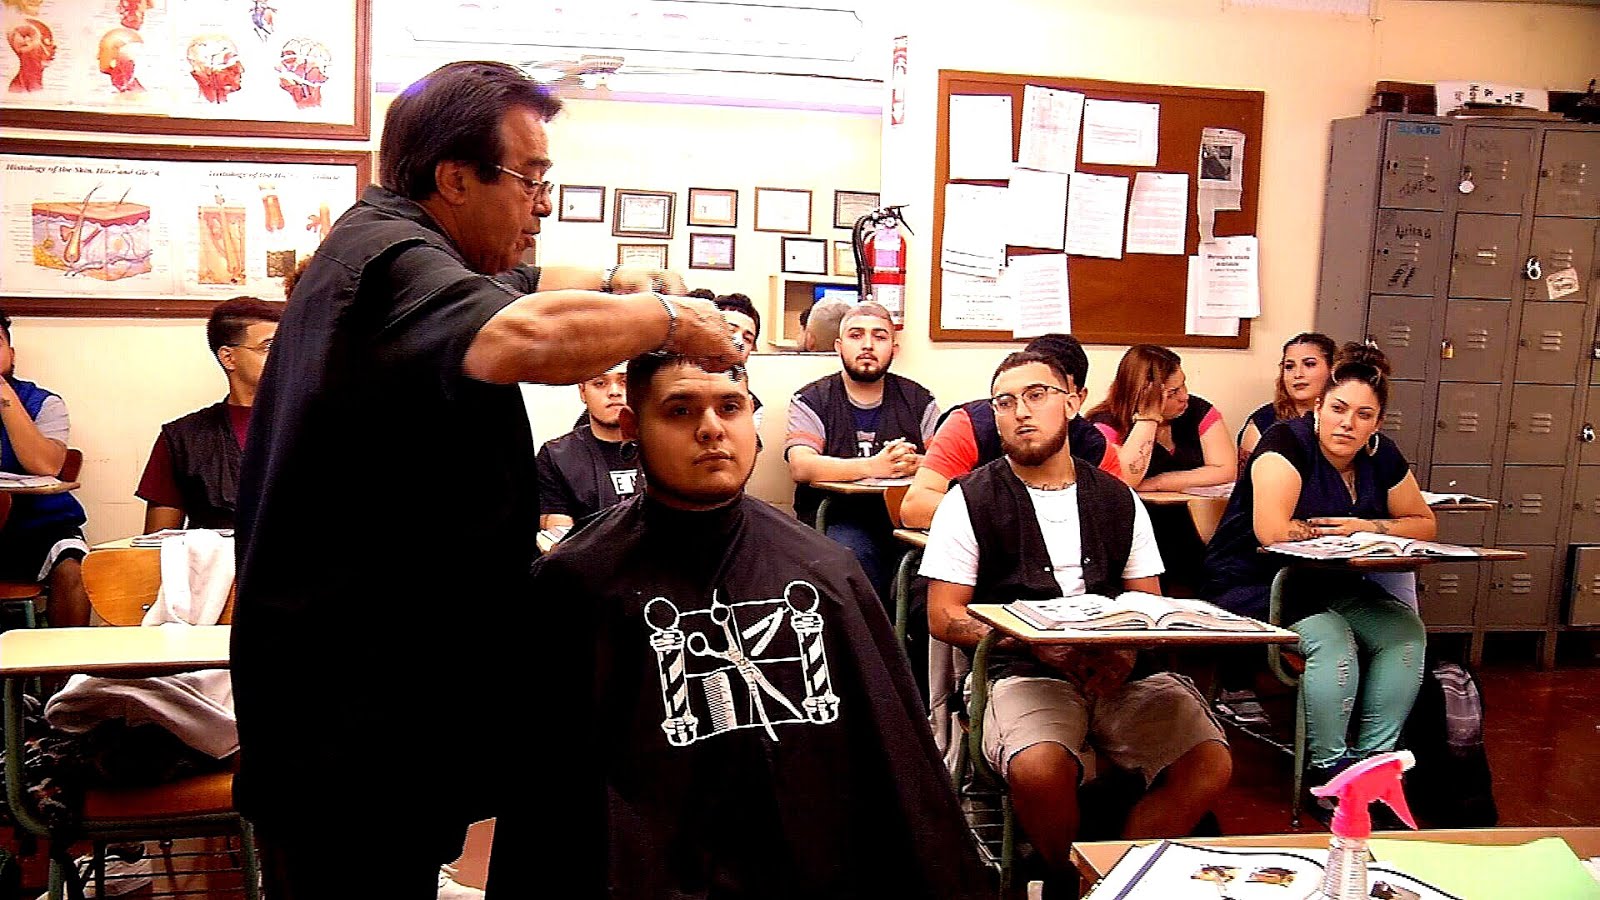 Texas Barber College And Hairstyling School - School Choices